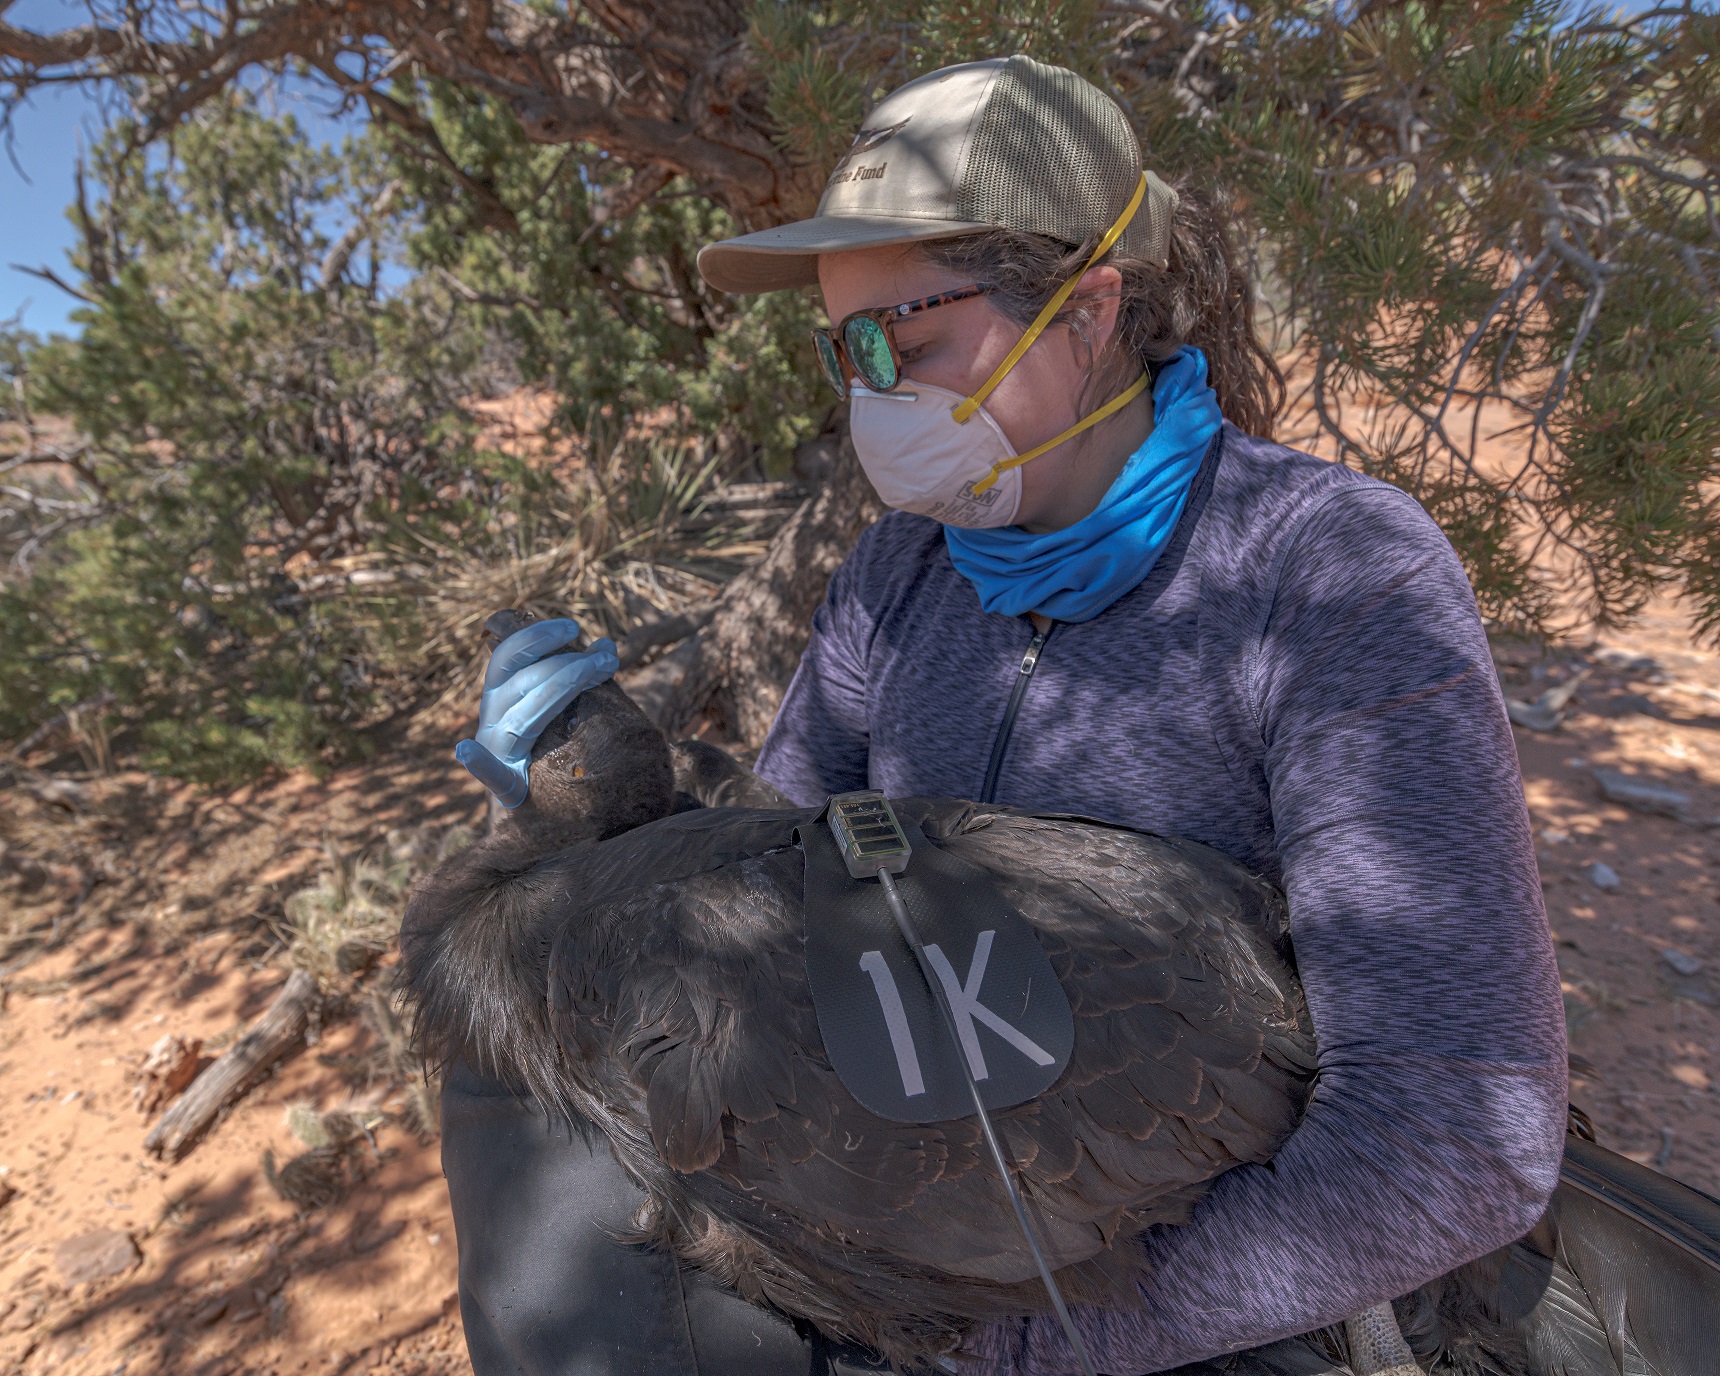 Angela Woodside carefully holds California Condor 1K prior to release back to the wild